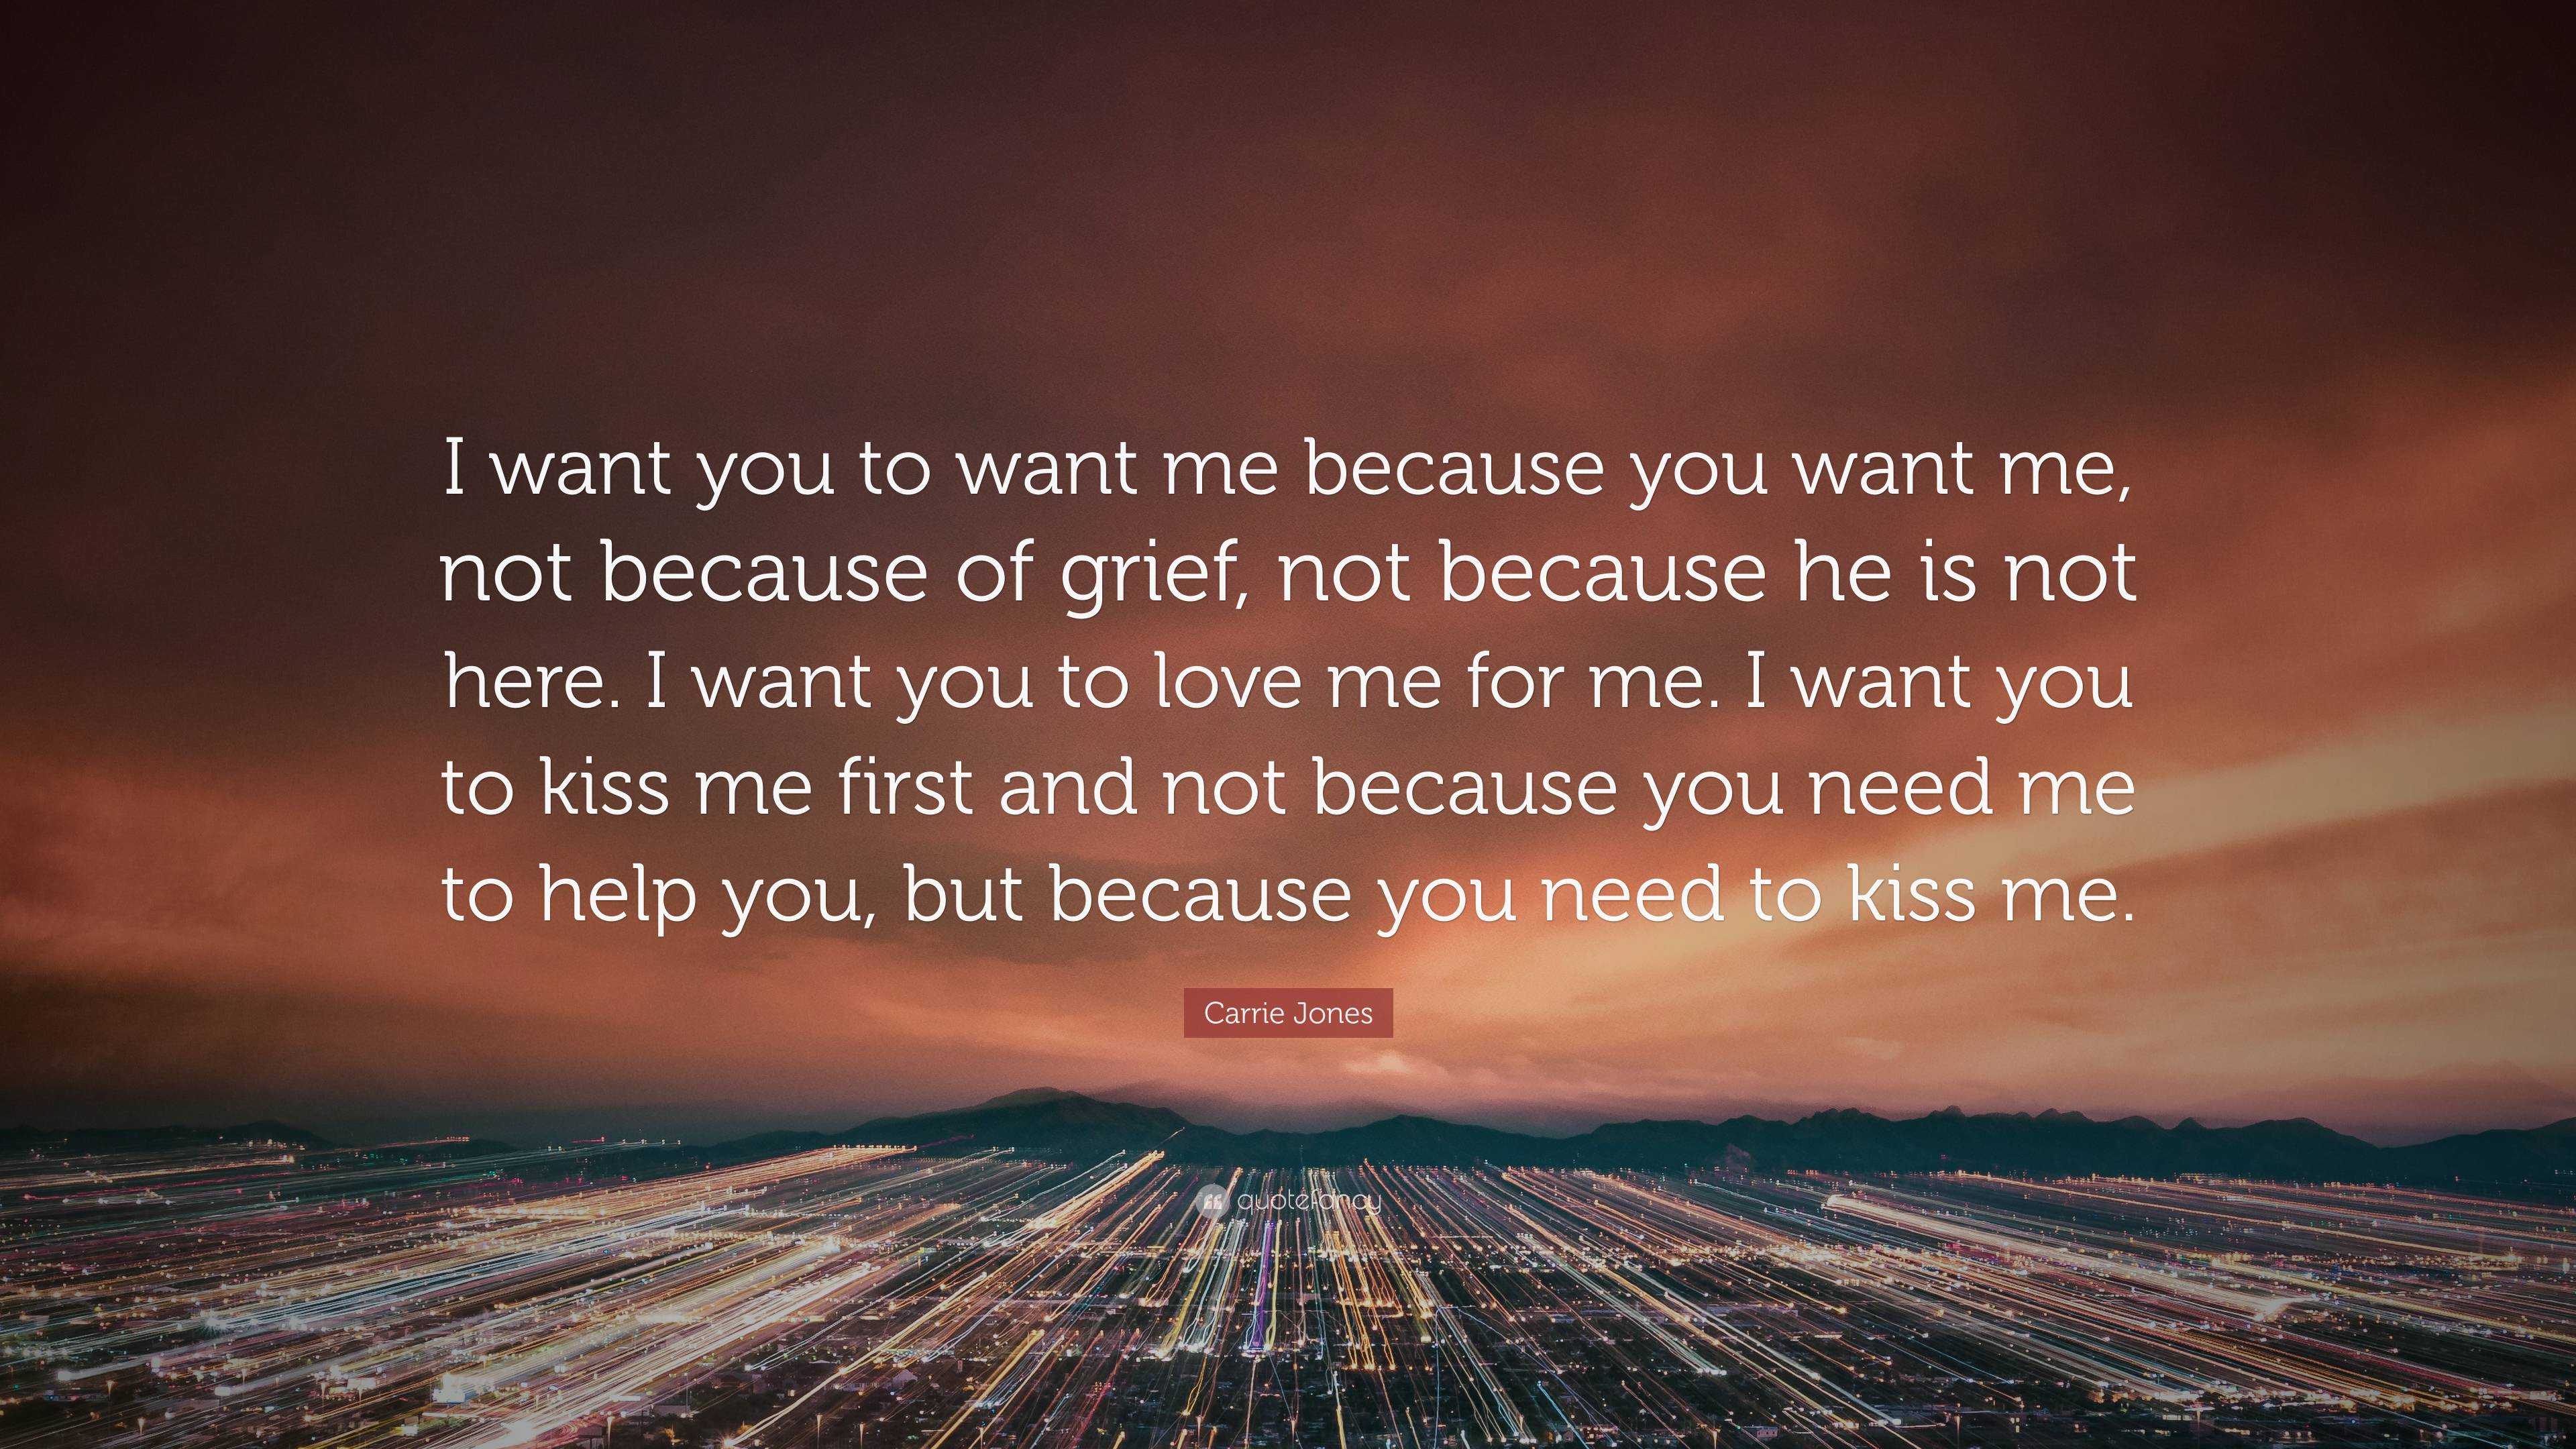 Carrie Jones Quote I Want You To Want Me Because You Want Me Not Because Of Grief Not Because He Is Not Here I Want You To Love Me For M